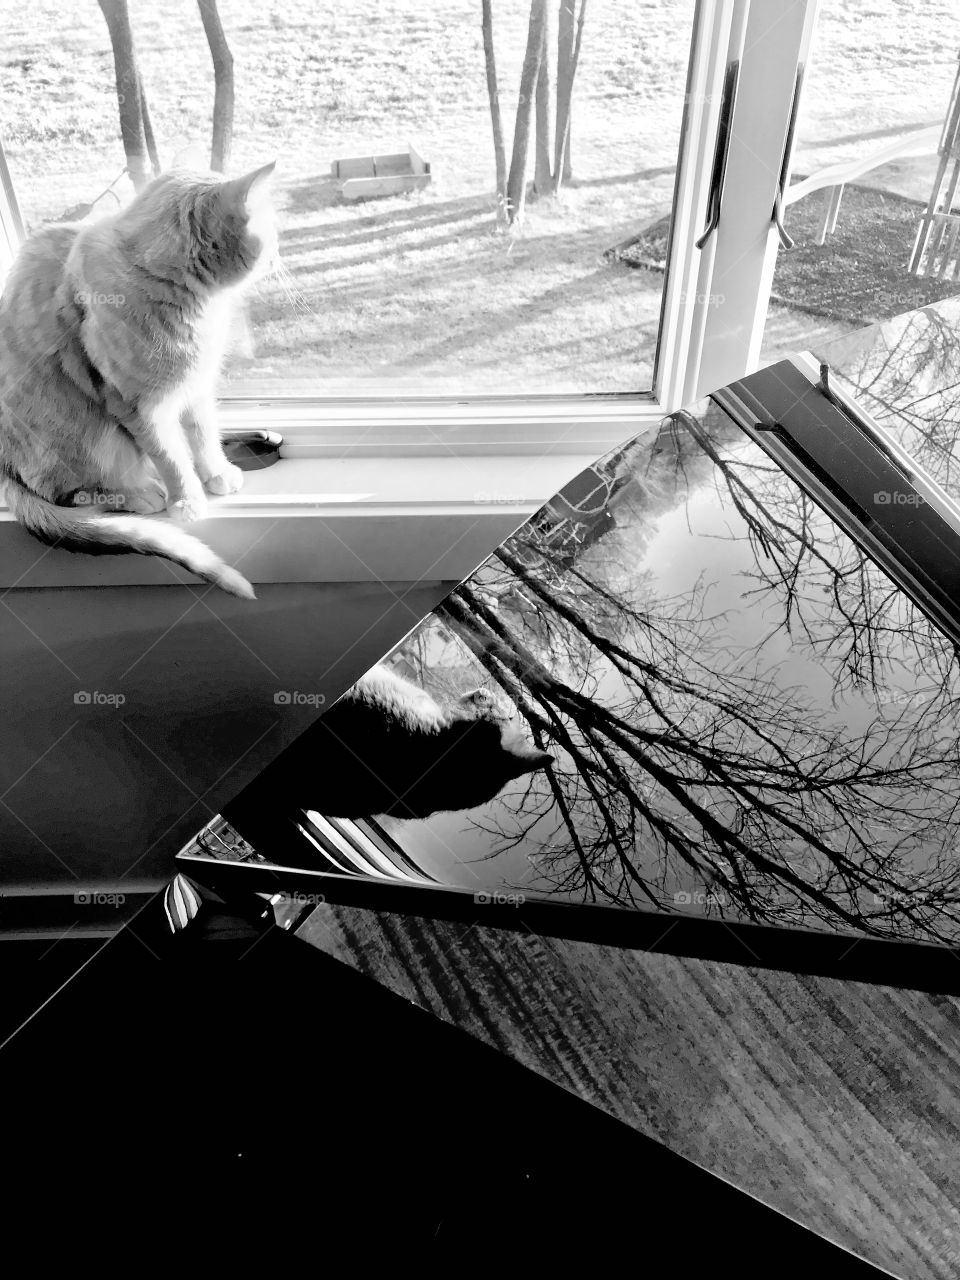 Darling black and white curious tabby cat enjoying sitting in window with beautiful reflection being captured in baby grand! 